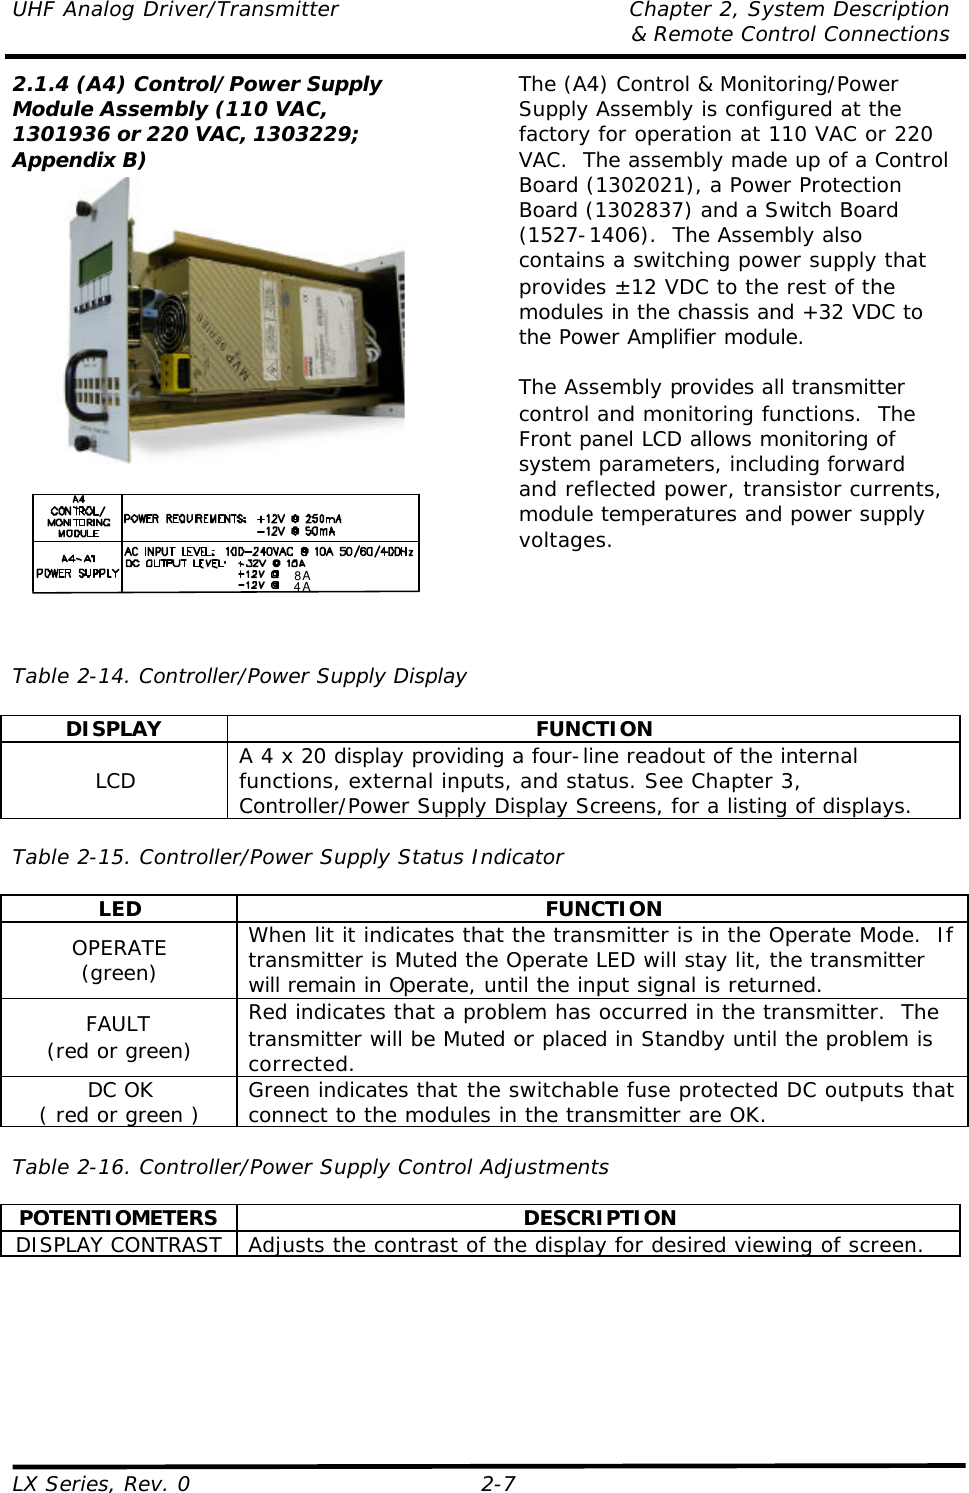 UHF Analog Driver/Transmitter Chapter 2, System Description  &amp; Remote Control Connections LX Series, Rev. 0 2-7 2.1.4 (A4) Control/Power Supply Module Assembly (110 VAC, 1301936 or 220 VAC, 1303229; Appendix B)    8 A4 A  The (A4) Control &amp; Monitoring/Power Supply Assembly is configured at the factory for operation at 110 VAC or 220 VAC.  The assembly made up of a Control Board (1302021), a Power Protection Board (1302837) and a Switch Board (1527-1406).  The Assembly also contains a switching power supply that provides ±12 VDC to the rest of the modules in the chassis and +32 VDC to the Power Amplifier module.  The Assembly provides all transmitter control and monitoring functions.  The Front panel LCD allows monitoring of system parameters, including forward and reflected power, transistor currents, module temperatures and power supply voltages.  Table 2-14. Controller/Power Supply Display  DISPLAY FUNCTION LCD A 4 x 20 display providing a four-line readout of the internal functions, external inputs, and status. See Chapter 3, Controller/Power Supply Display Screens, for a listing of displays.  Table 2-15. Controller/Power Supply Status Indicator  LED FUNCTION OPERATE (green) When lit it indicates that the transmitter is in the Operate Mode.  If transmitter is Muted the Operate LED will stay lit, the transmitter will remain in Operate, until the input signal is returned. FAULT (red or green) Red indicates that a problem has occurred in the transmitter.  The transmitter will be Muted or placed in Standby until the problem is corrected. DC OK ( red or green ) Green indicates that the switchable fuse protected DC outputs that connect to the modules in the transmitter are OK.  Table 2-16. Controller/Power Supply Control Adjustments  POTENTIOMETERS DESCRIPTION DISPLAY CONTRAST Adjusts the contrast of the display for desired viewing of screen.  